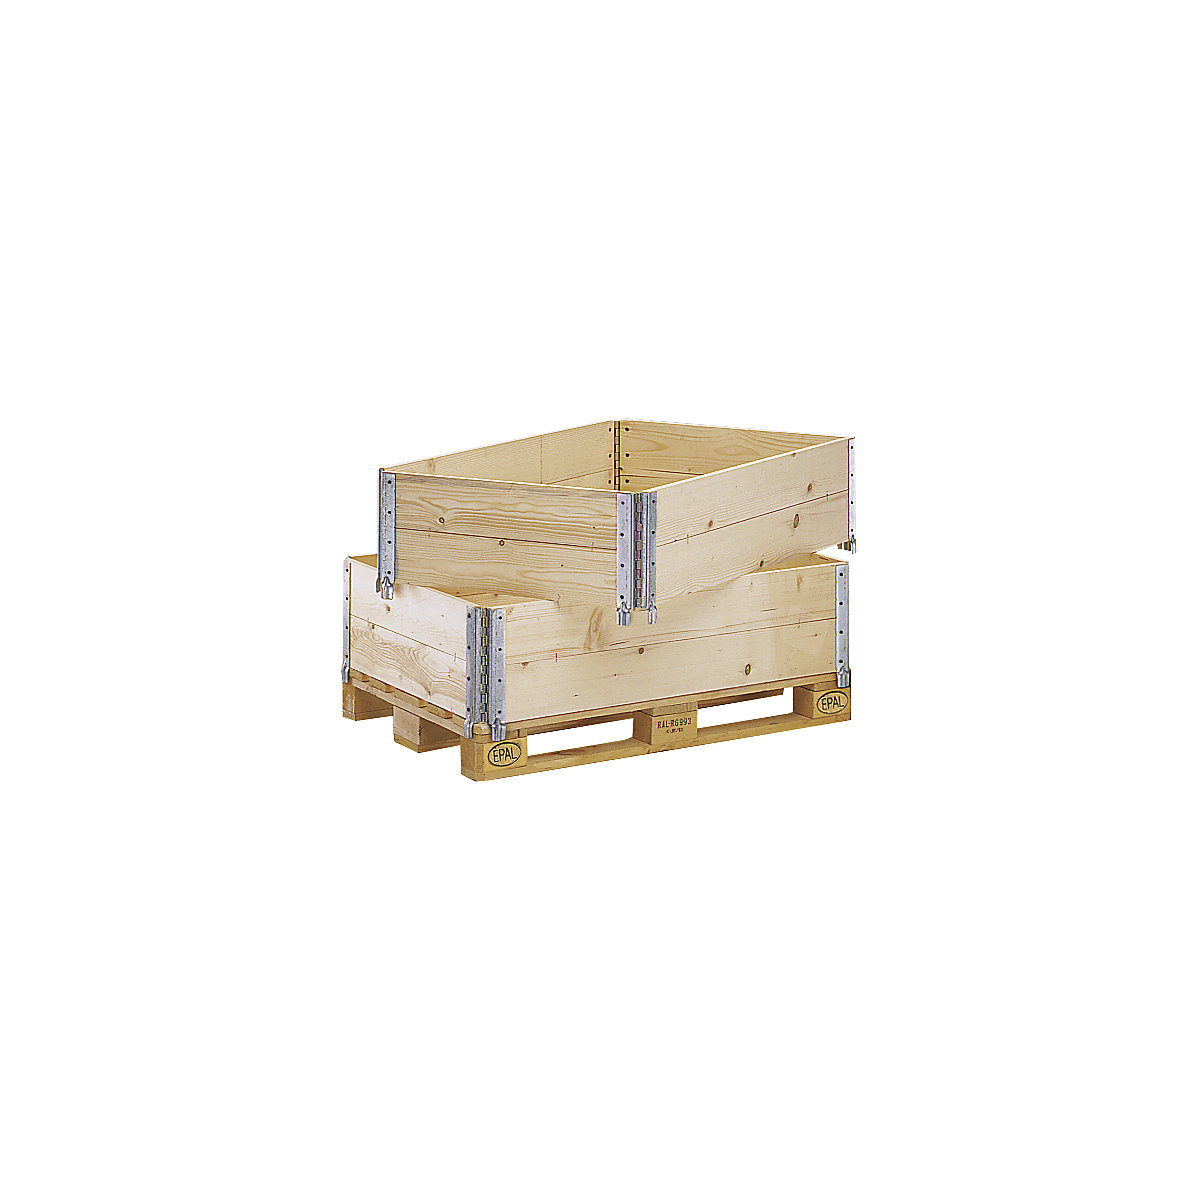 Wooden pallet collar for Euro pallet size